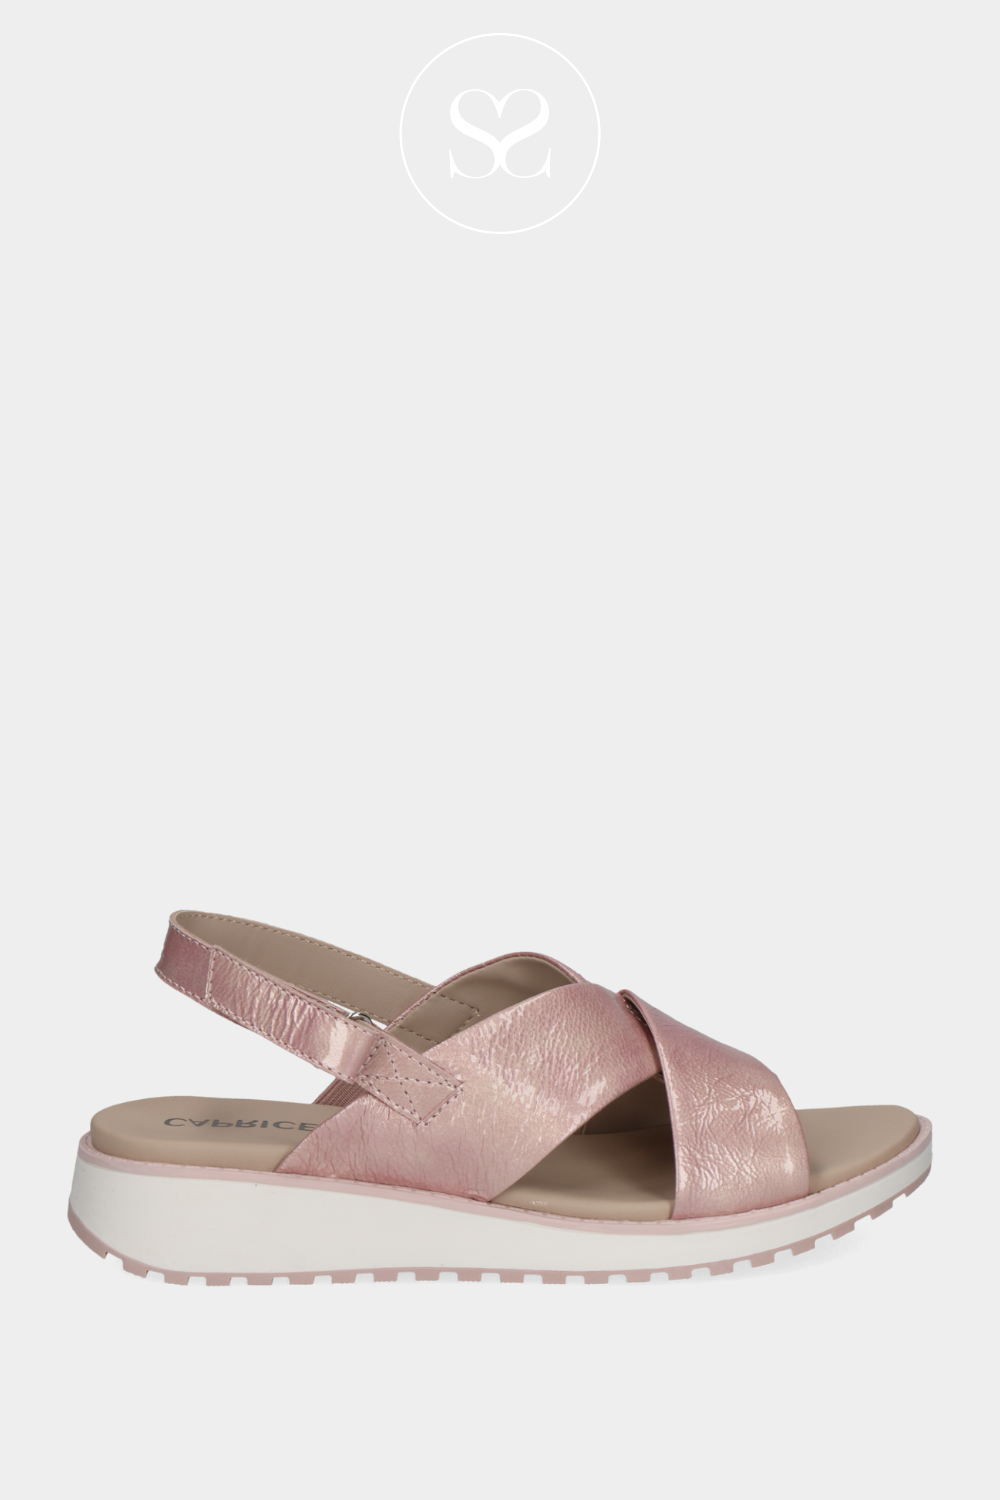 CAPRICE 9-28703-42 PINK WEDGE CRISS CROSS WEDGE SANDALS WITH ELASTICATED SLINGBACK